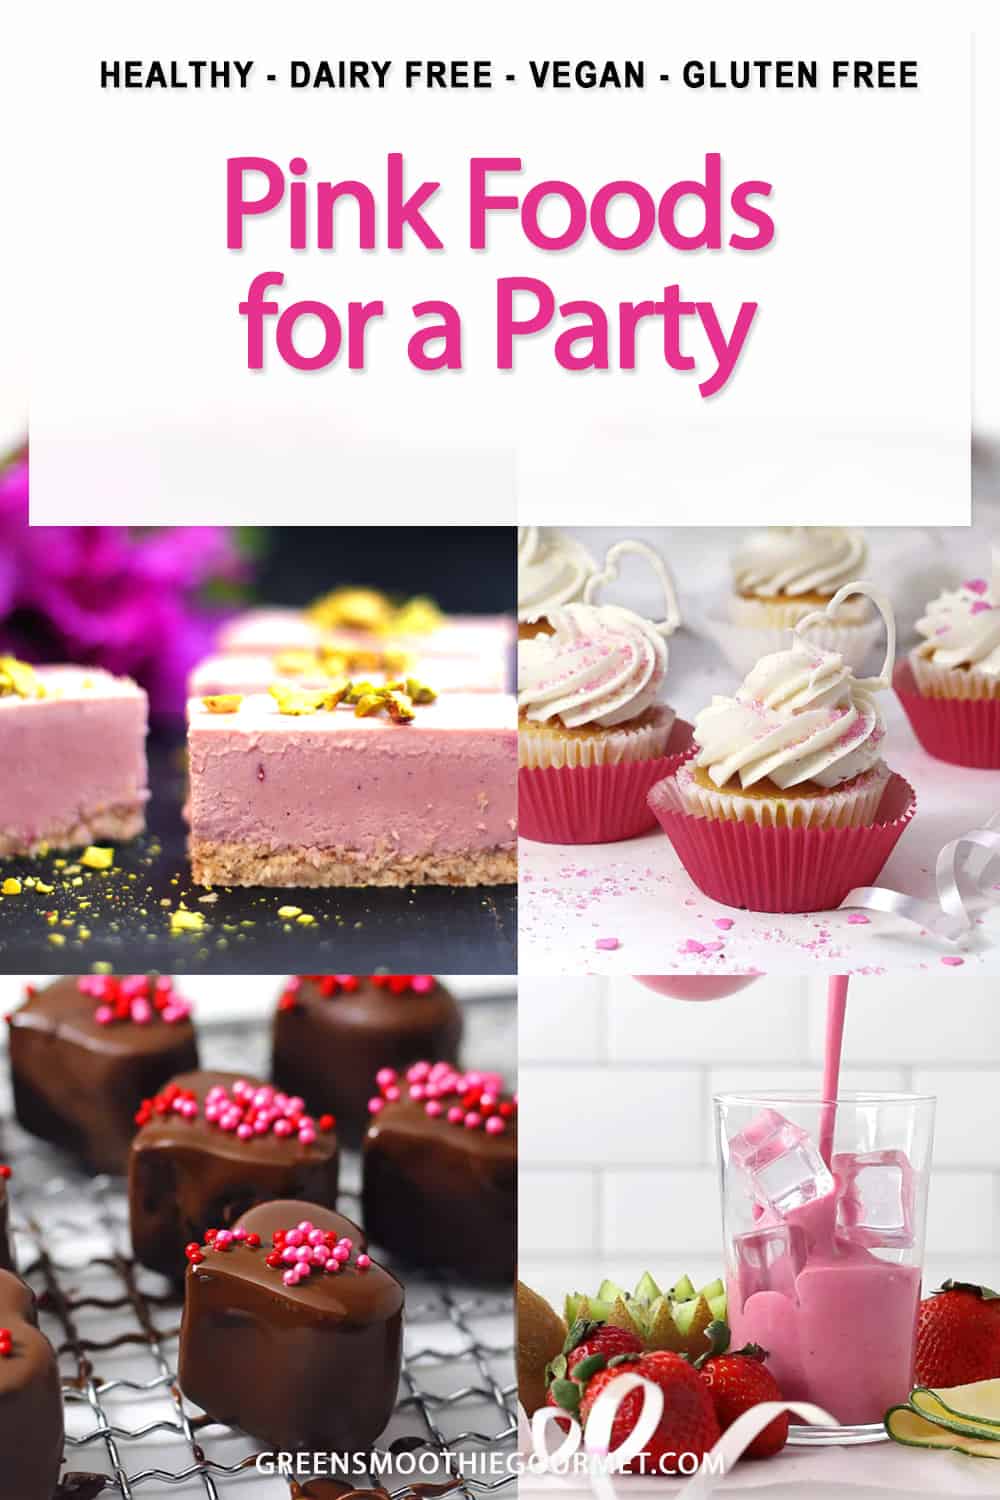 foods that are pink for a party in a collection.